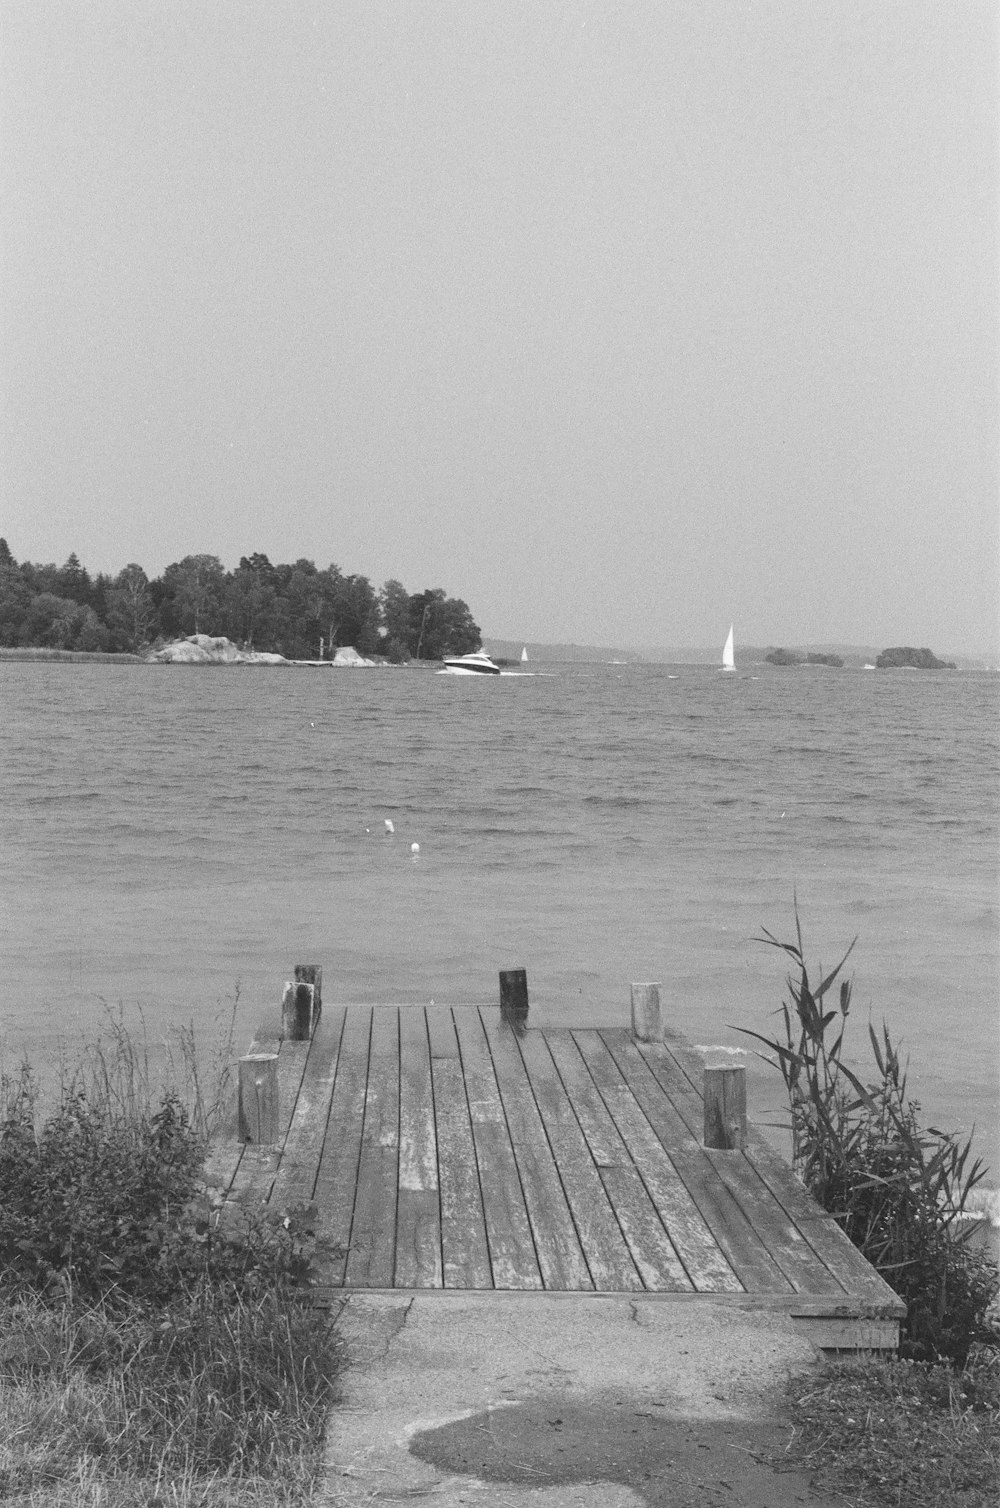 grayscale photo of wooden dock on body of water